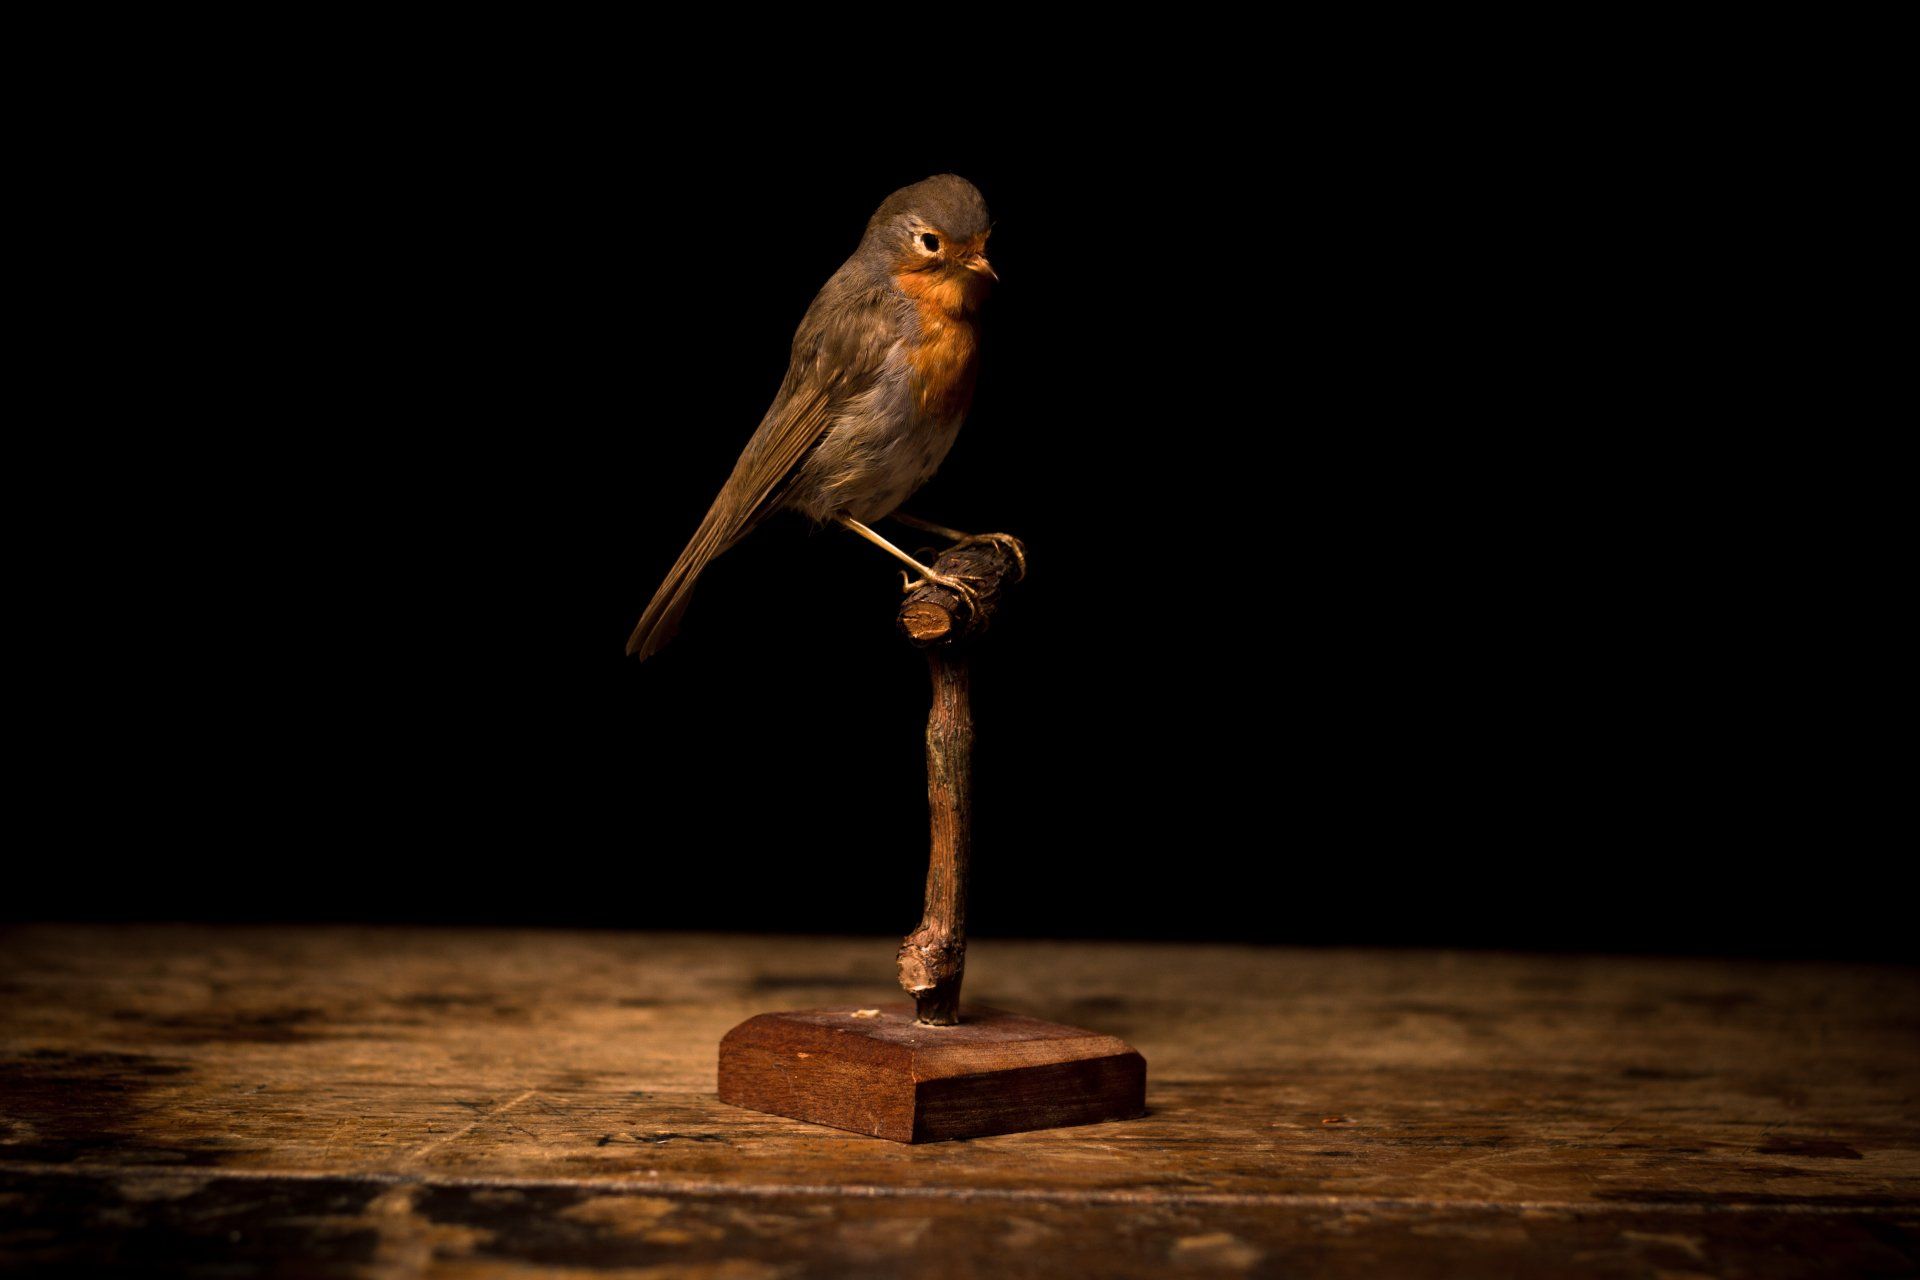 Taxidermy protector - image of taxidermy mounted bird